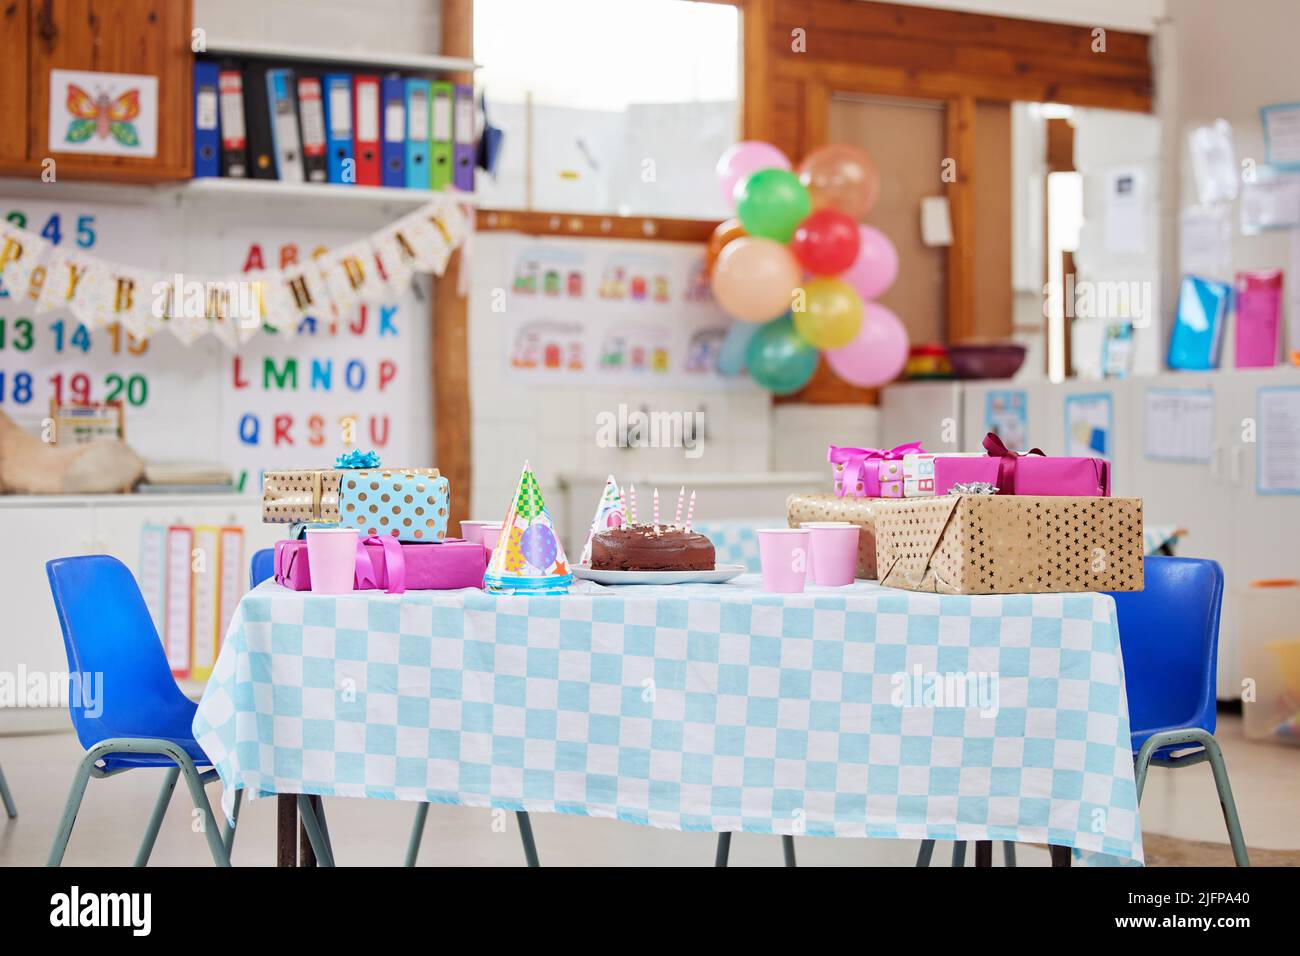 Its going to be a fun day in class. Shot of an empty class room decorated for a birthday party. Stock Photo